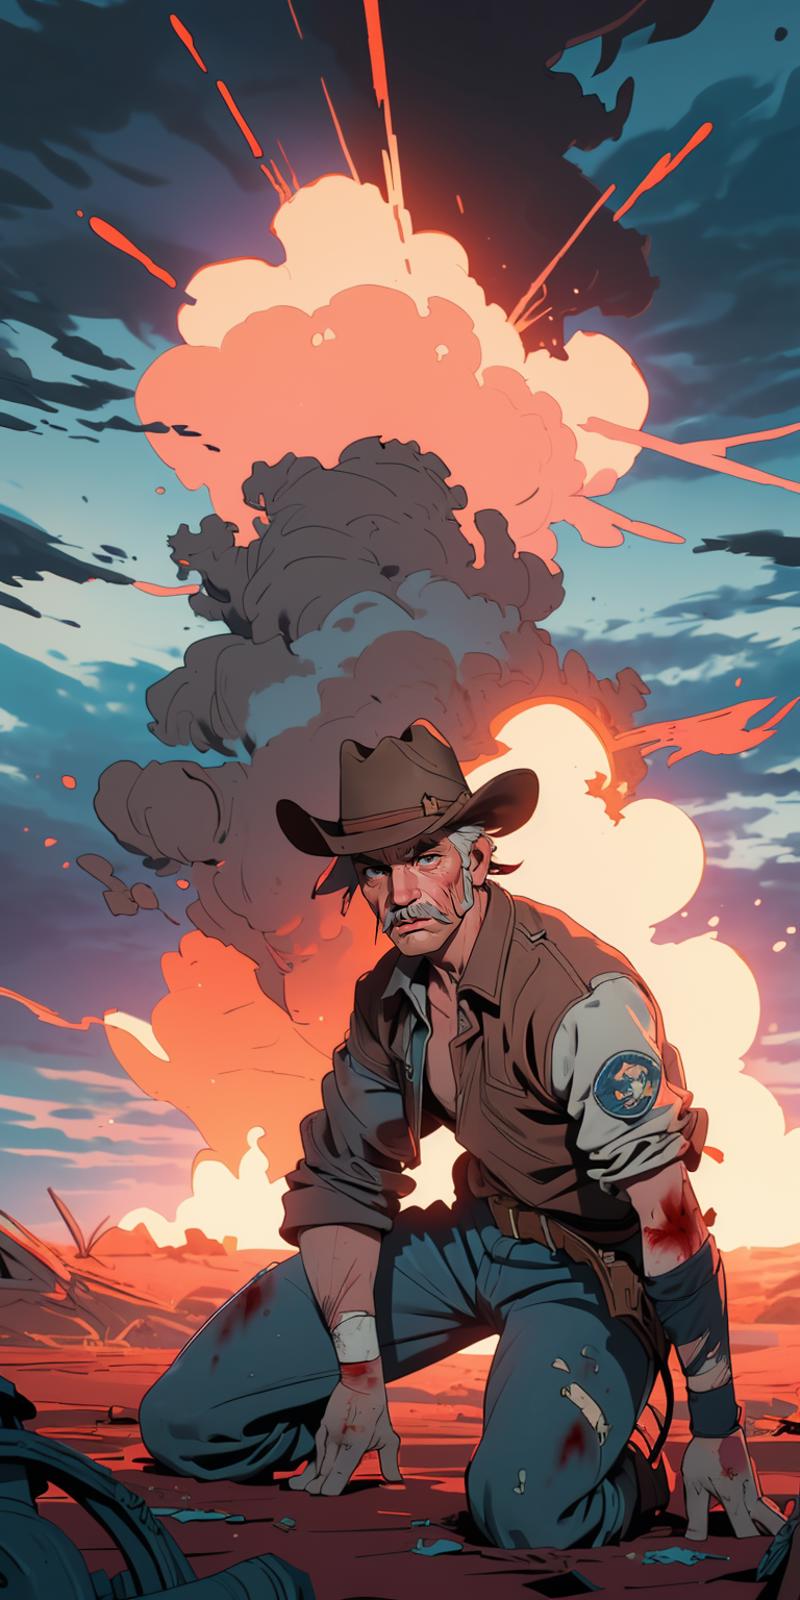 Man in a cowboy hat with a beard and mustache standing in front of an explosion.